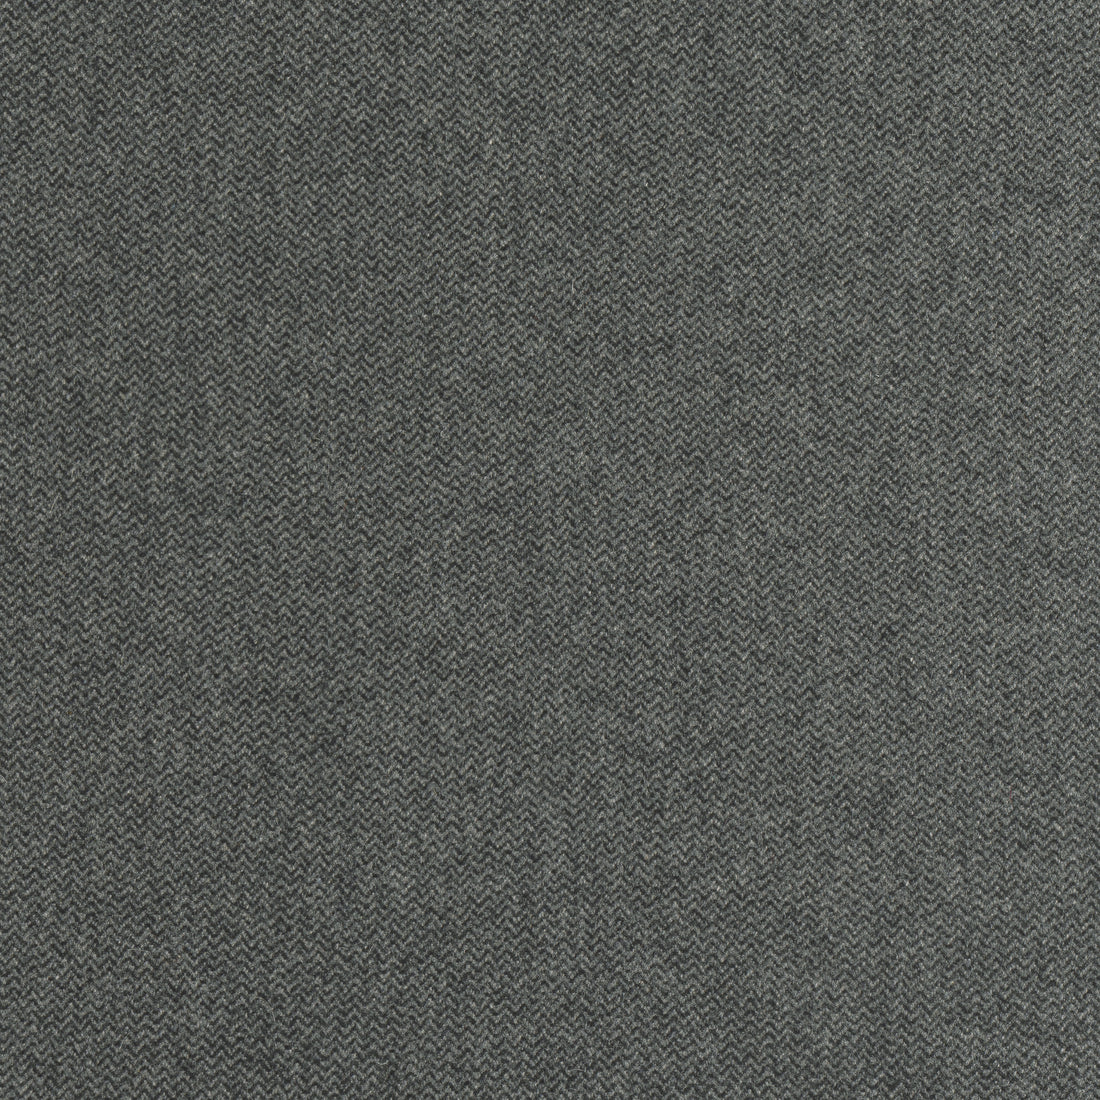 Dorset fabric in charcoal color - pattern number W80915 - by Thibaut in the Dunmore collection